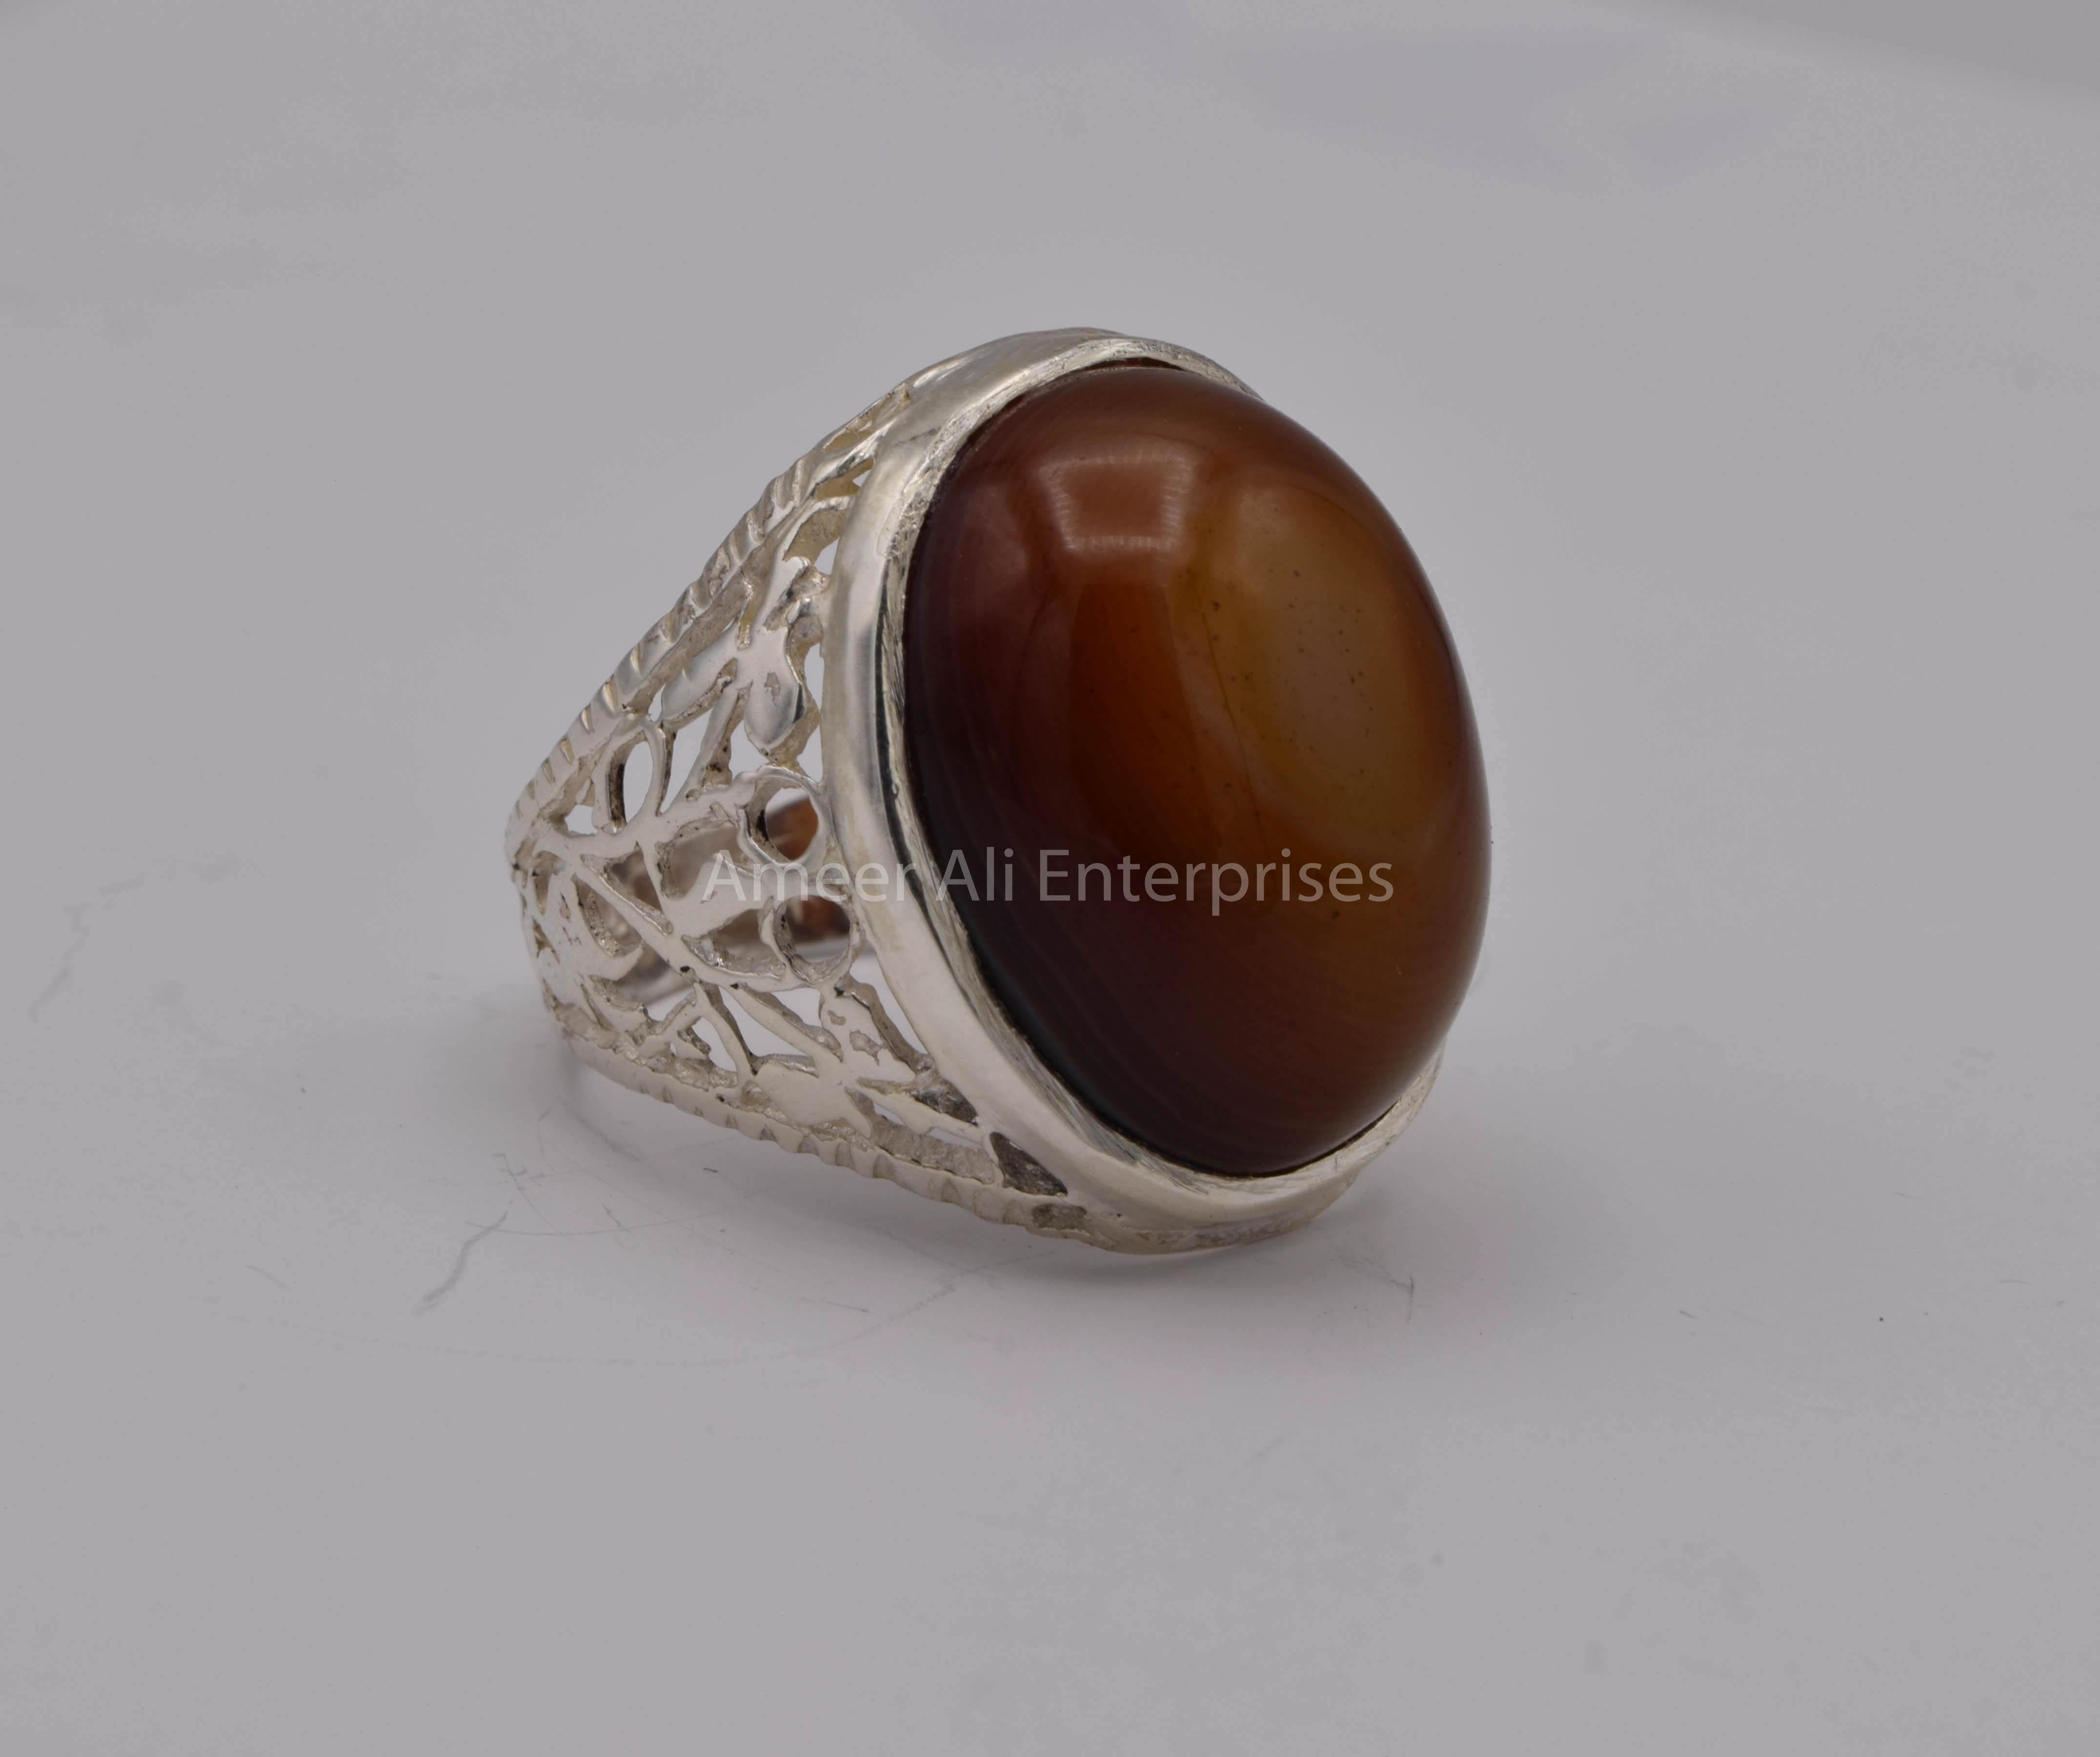 Yemen Agate (Aqeeq) Stone Carving Ottoman Style Sterling Silver Men's Ring  (O) : Amazon.co.uk: Fashion